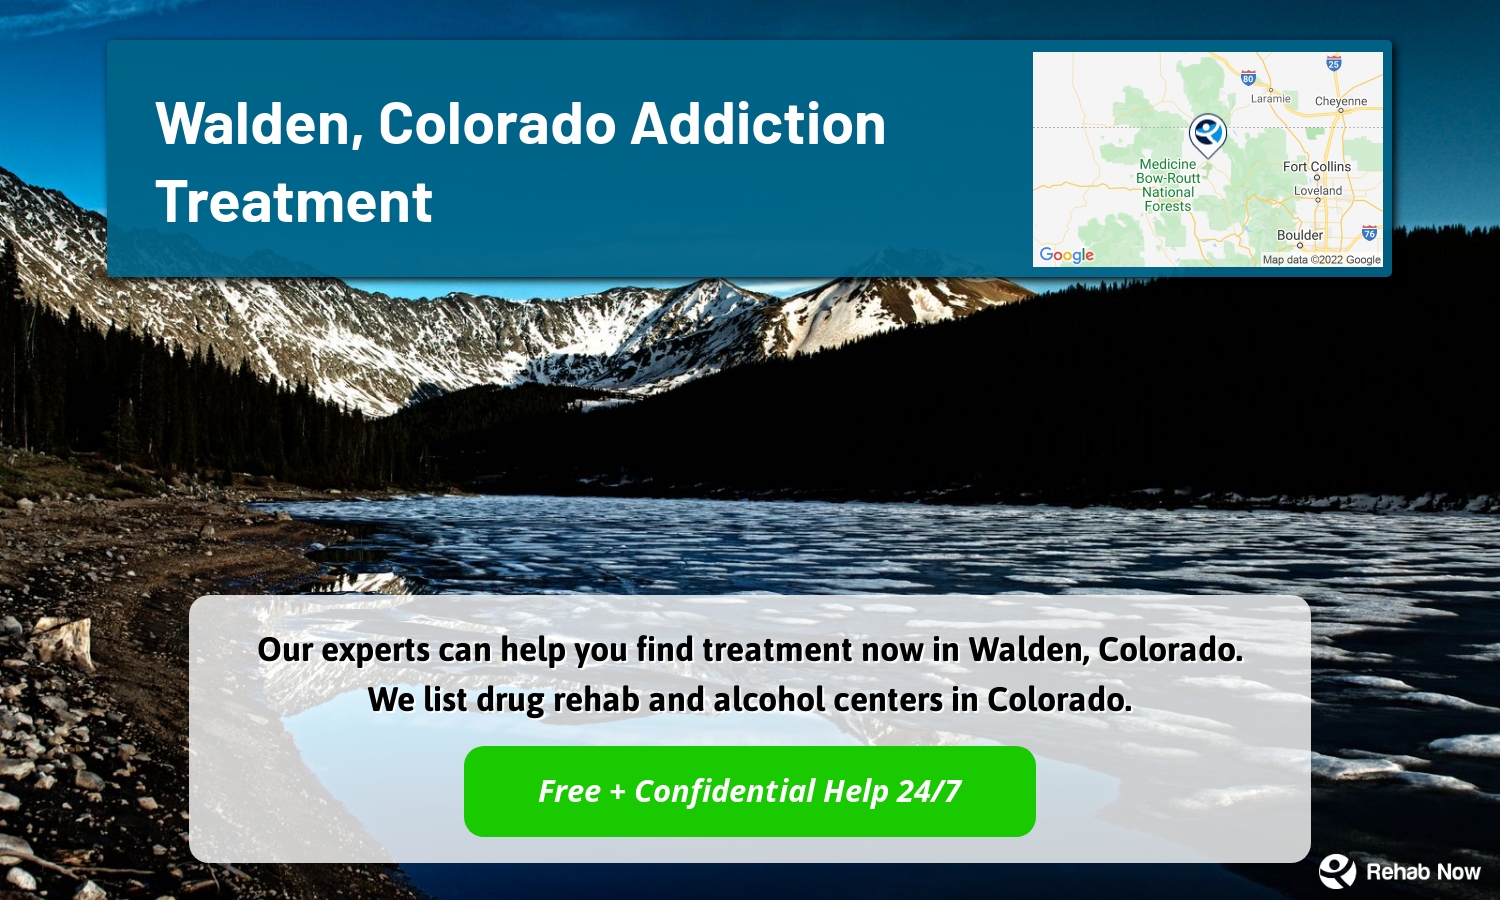 Our experts can help you find treatment now in Walden, Colorado. We list drug rehab and alcohol centers in Colorado.